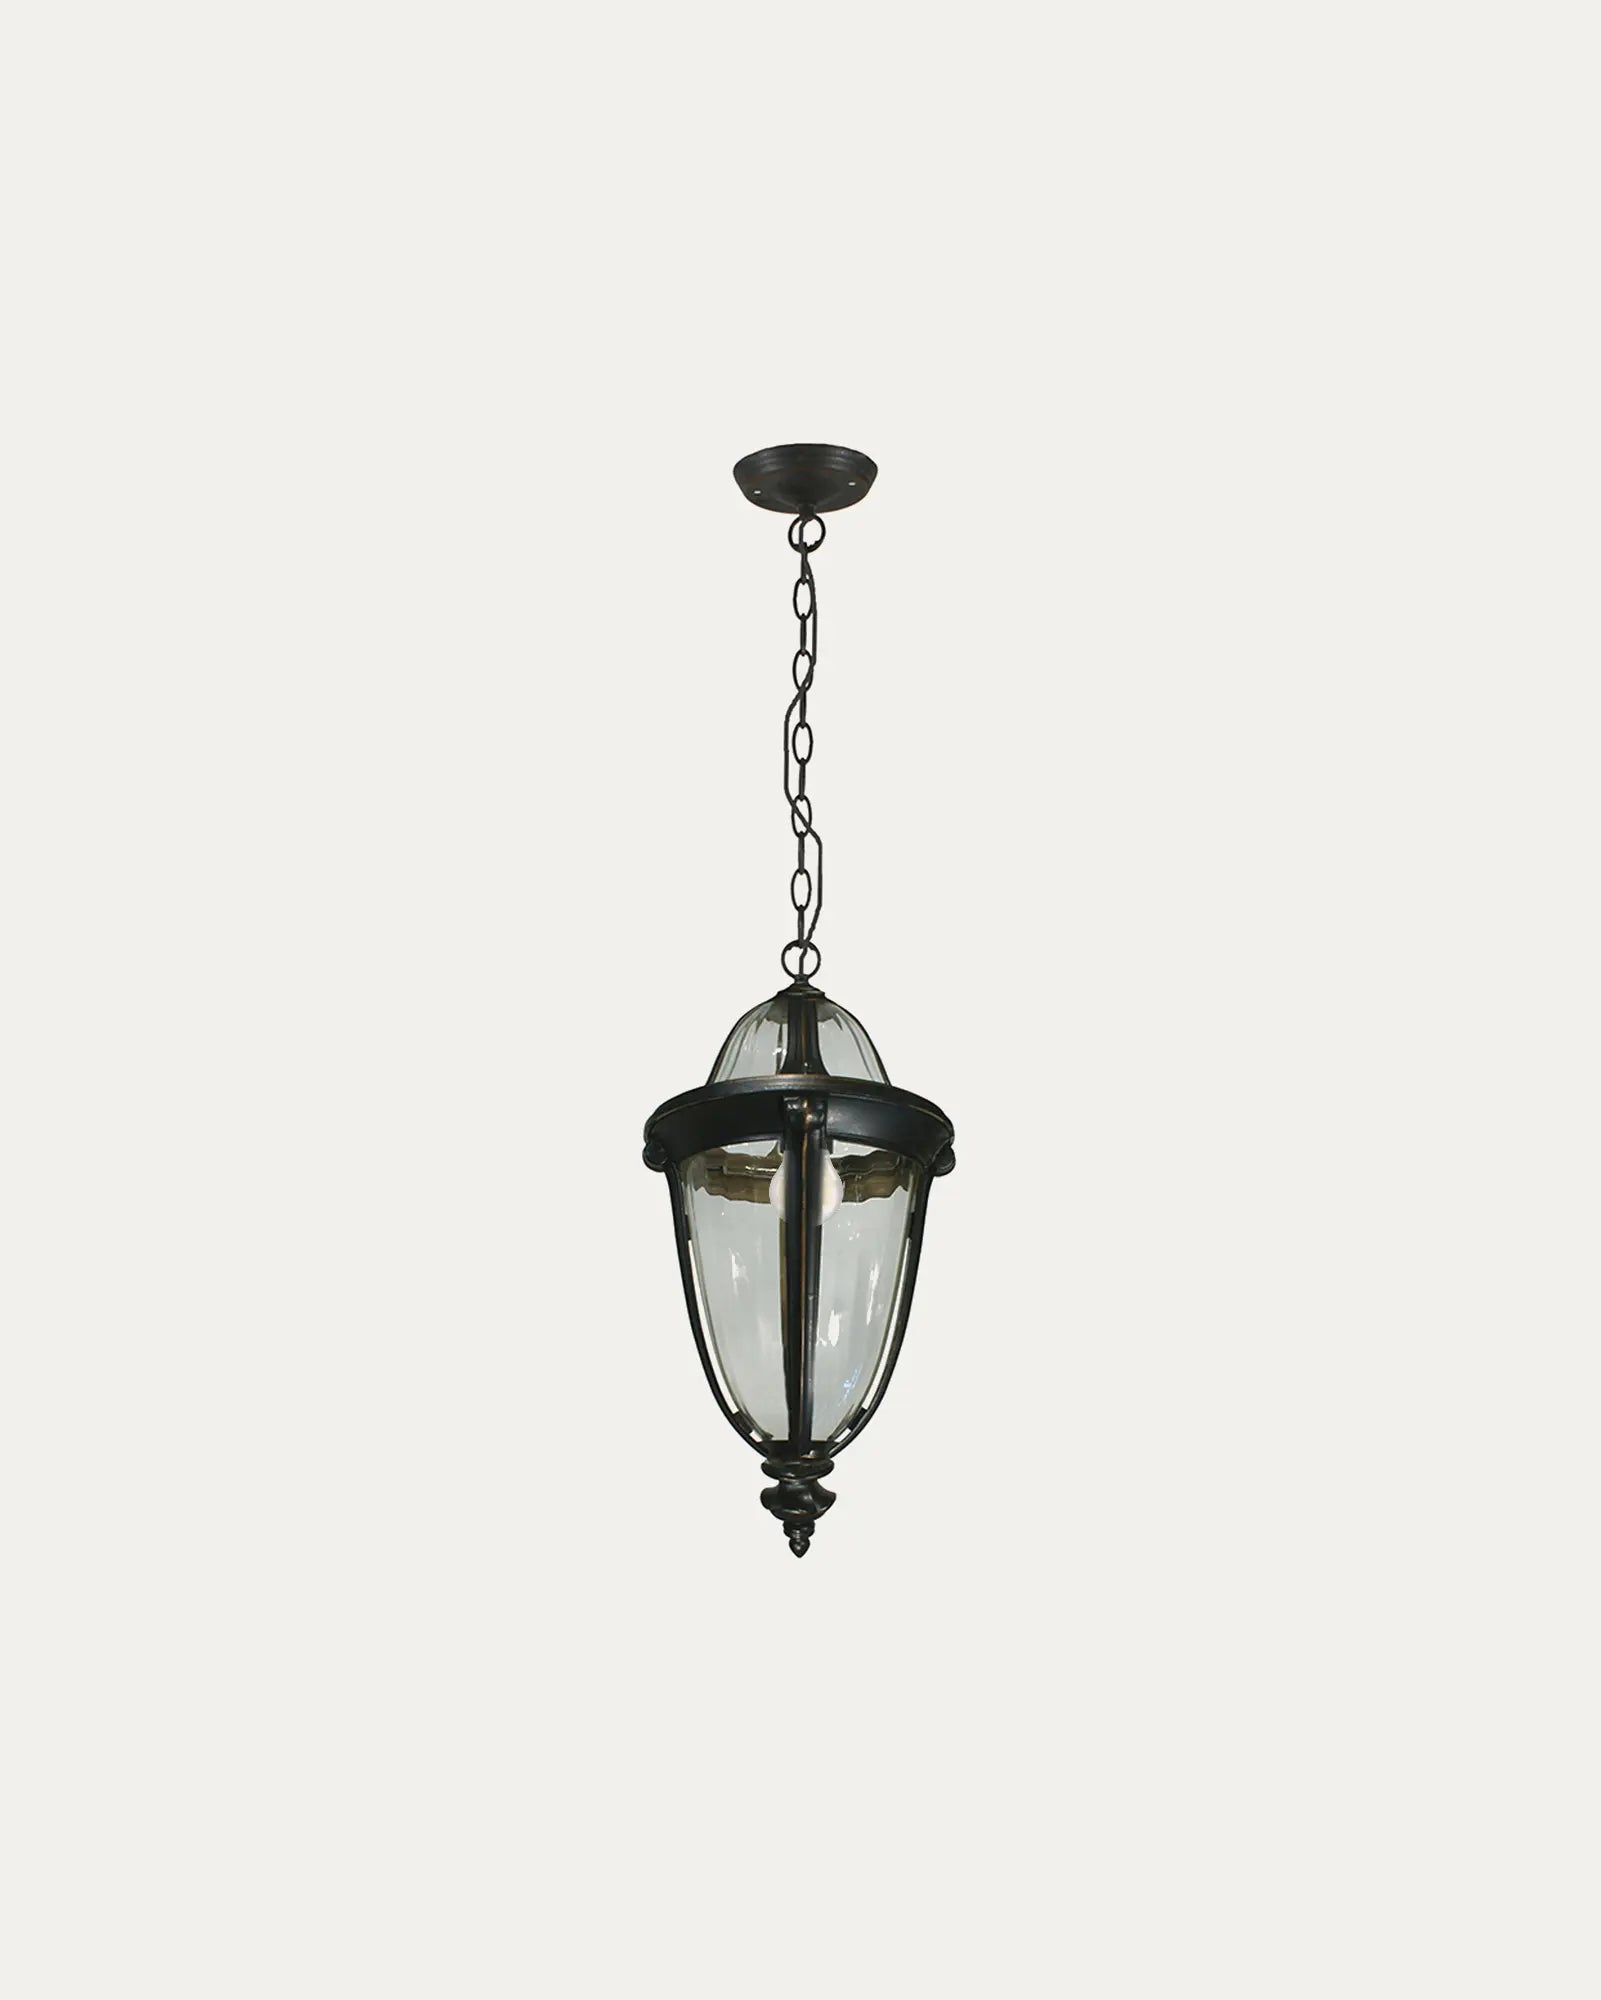 Mayfair chain pendant light by Inspiration Light at Nook Collections